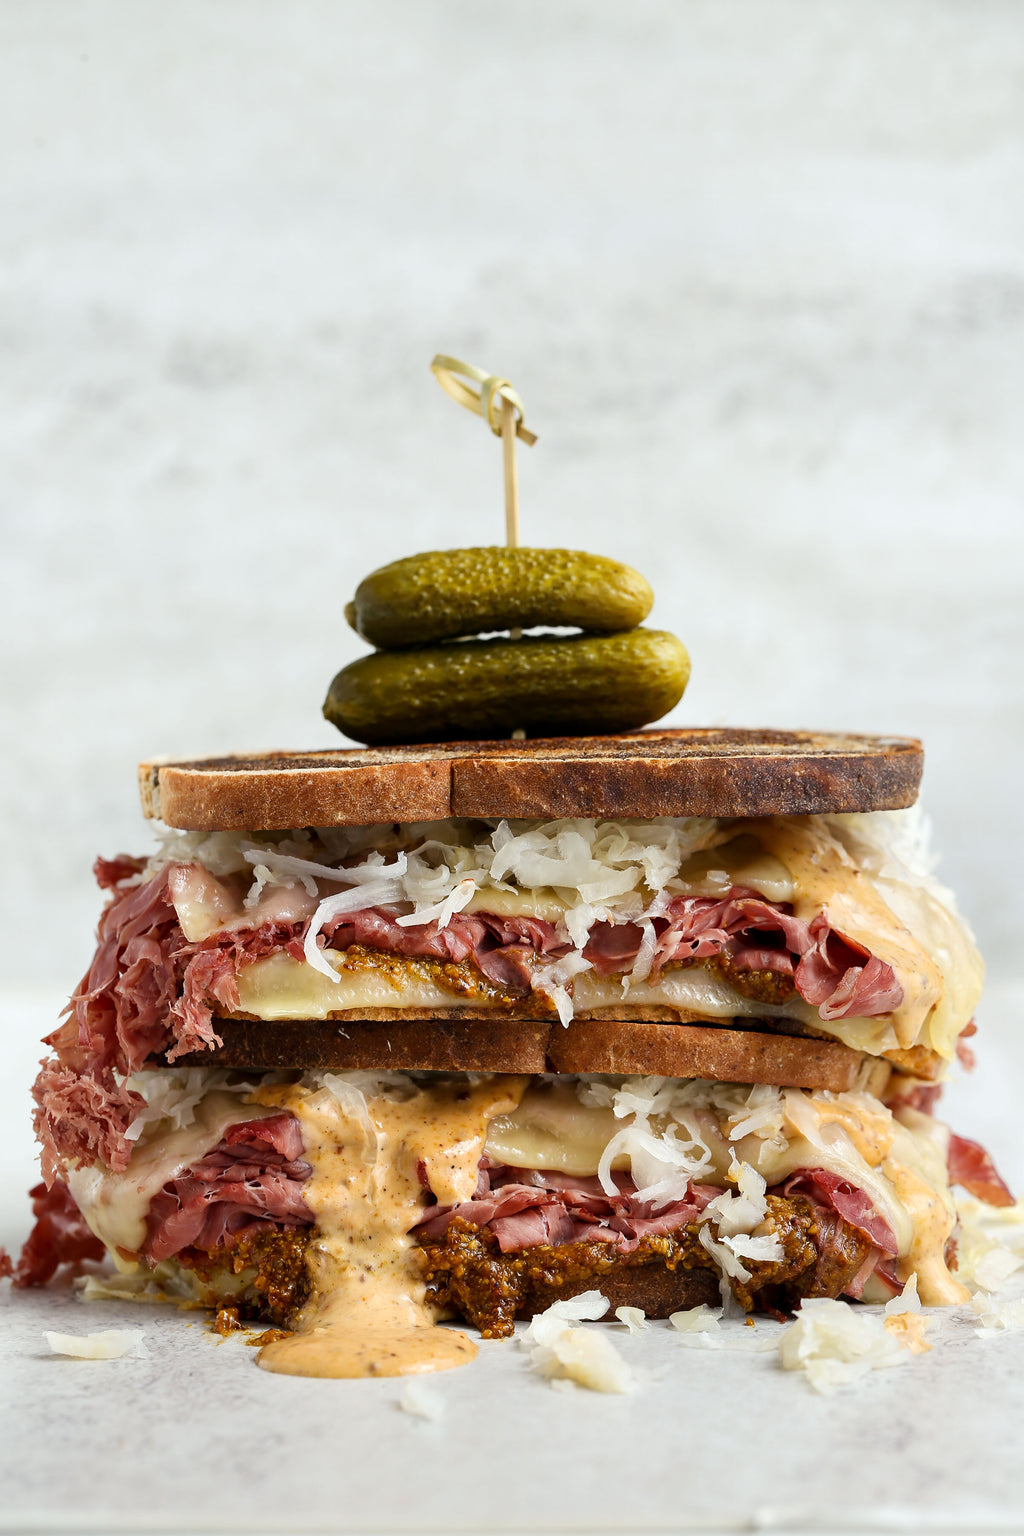 Corned Beef Reuben with Southern Style Rustic Mustard "Russian" Dressing